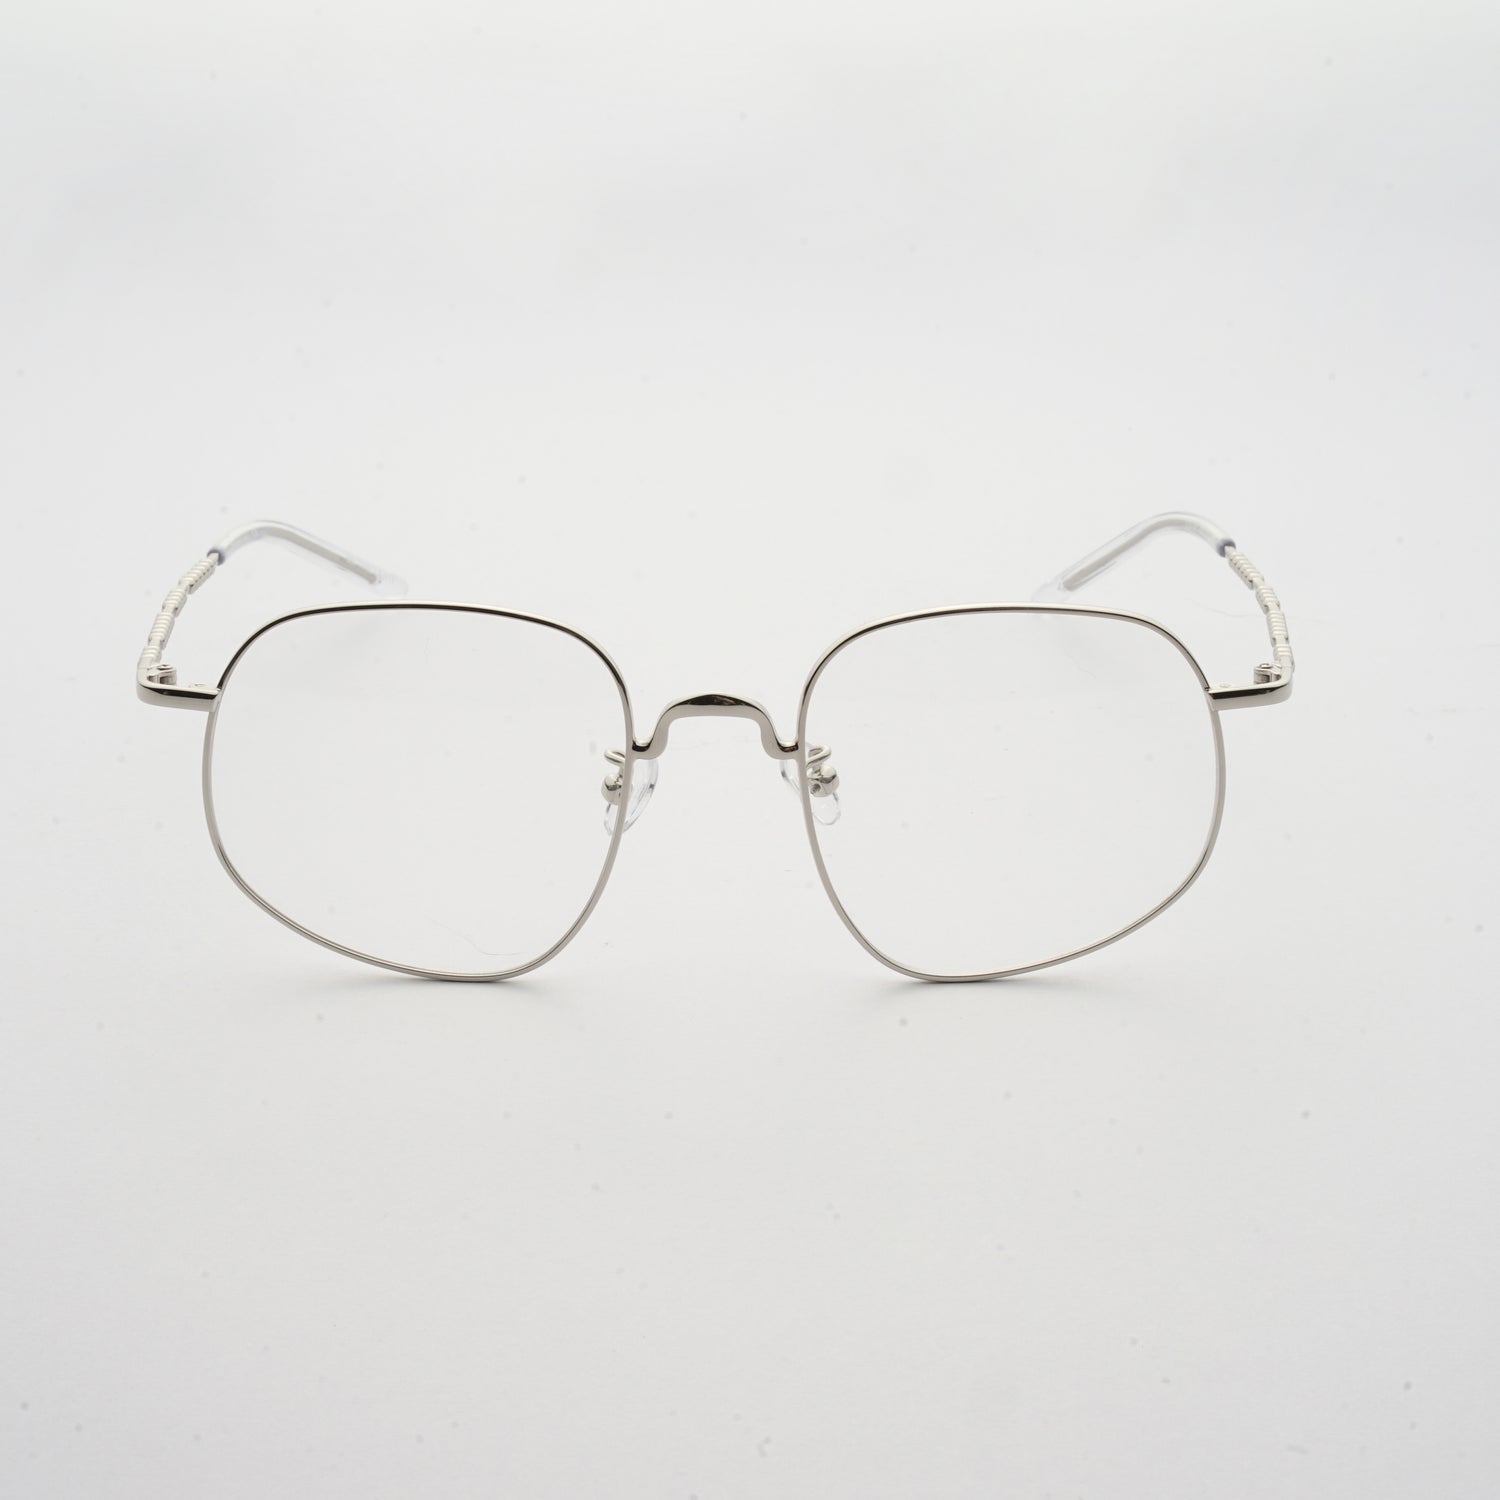 chrome colour stainless steel optical frame with morse code details on the temples front